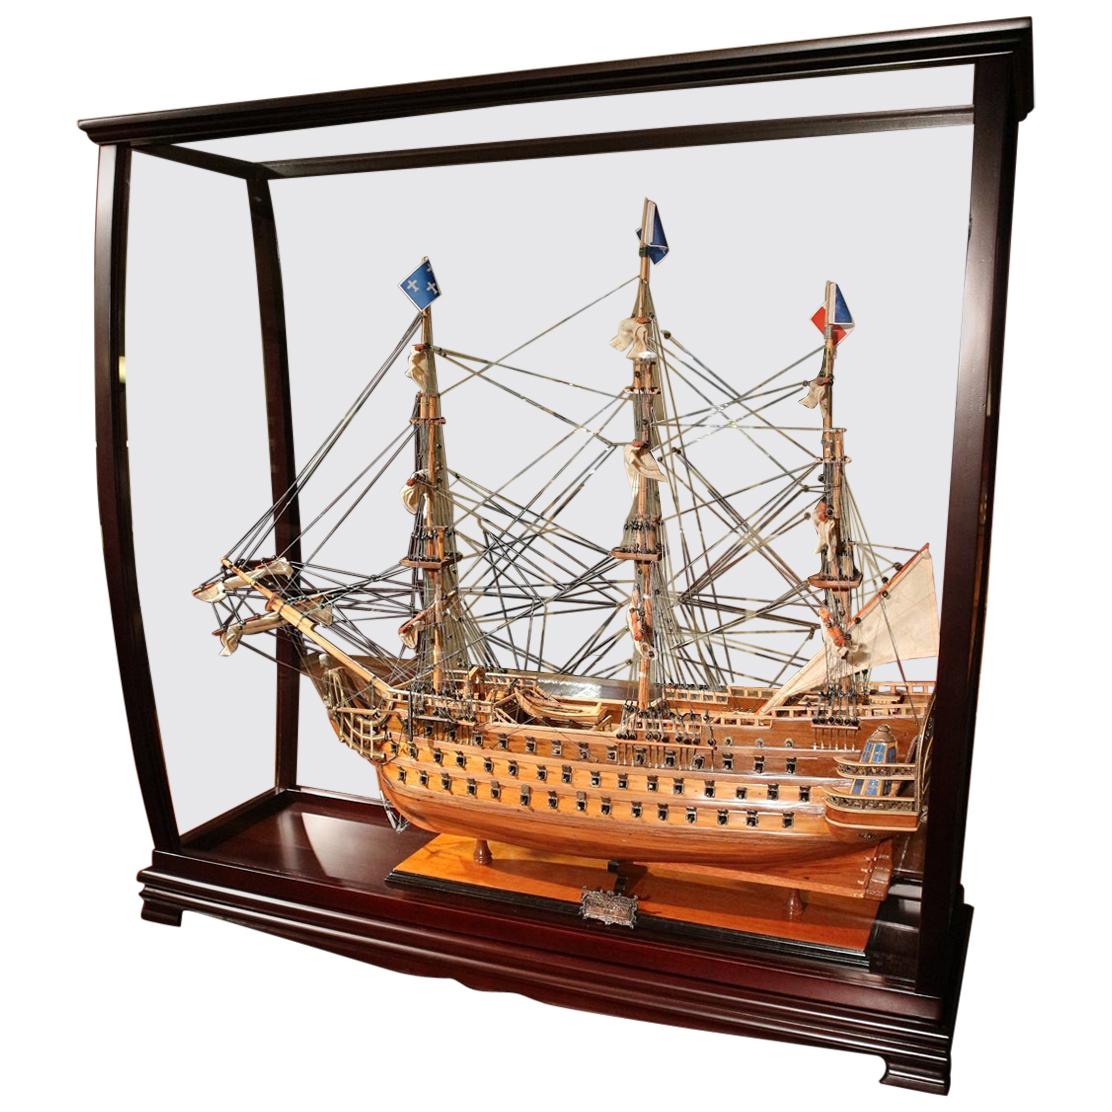 Museum-Quality, Fully Assembled Replica of Royal louis